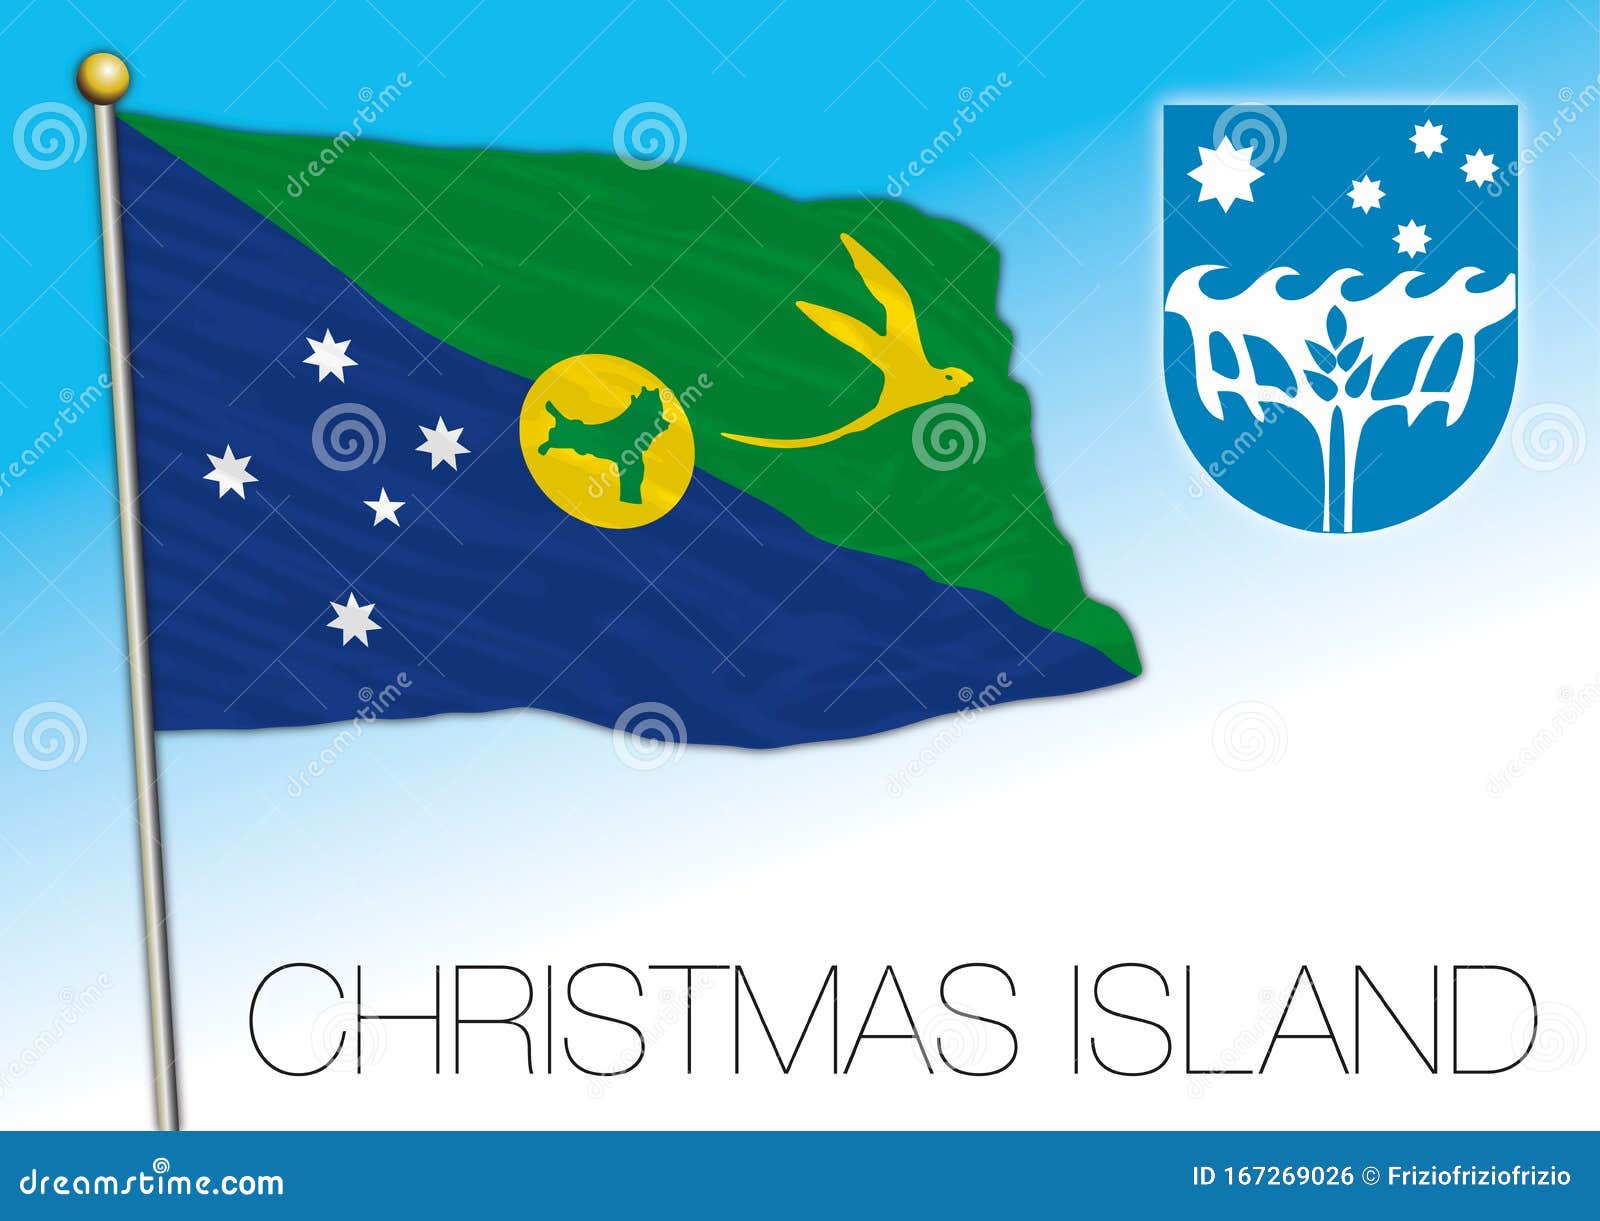 Christmas Island Flag And Coat Of Arms Stock Vector - Illustration of coast, country: 167269026